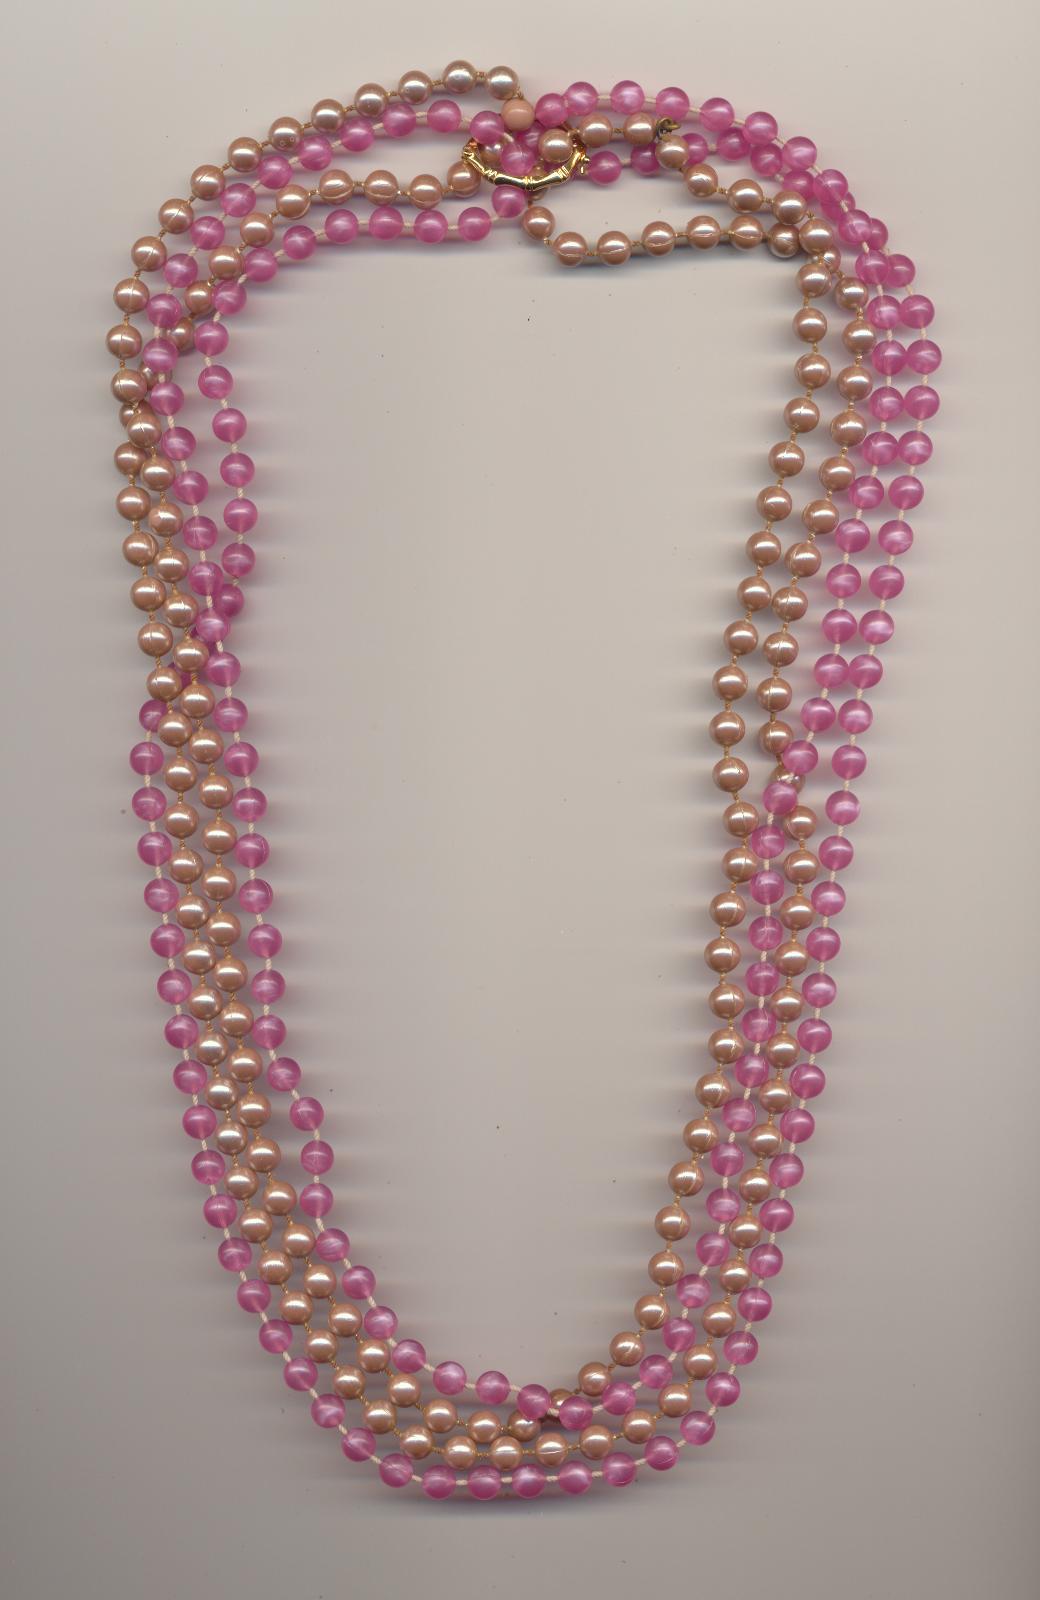 A Four Strand Bead Necklace Made Of Two Necklaces And A Pearl Shortener